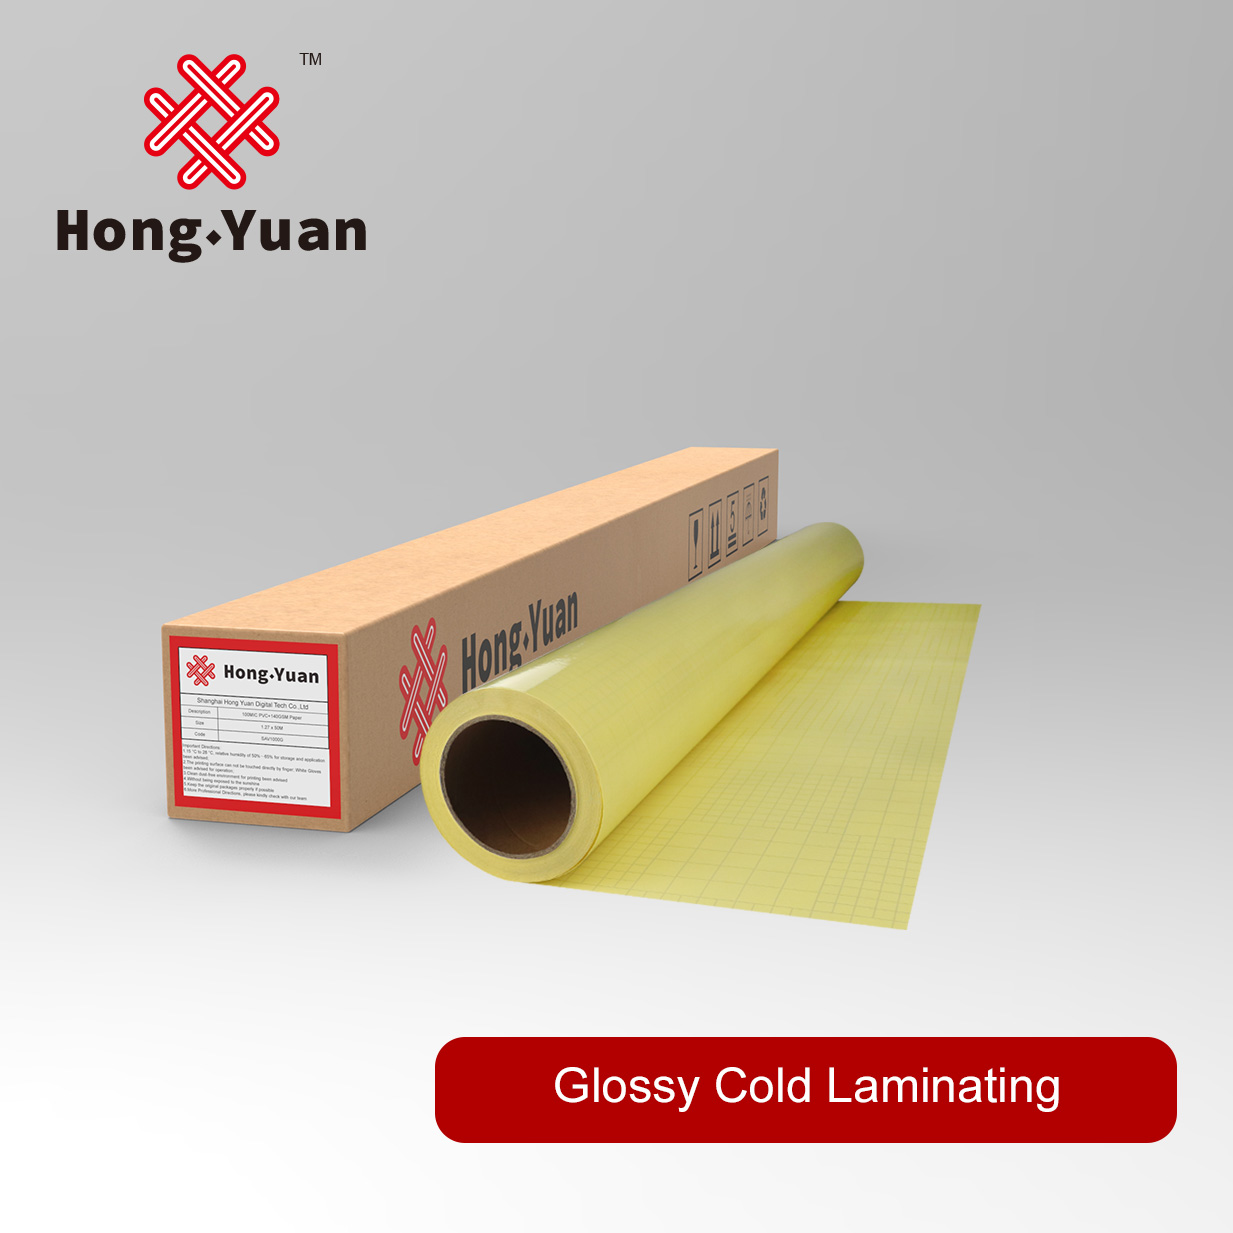 Glossy Cold Laminating CL1000G